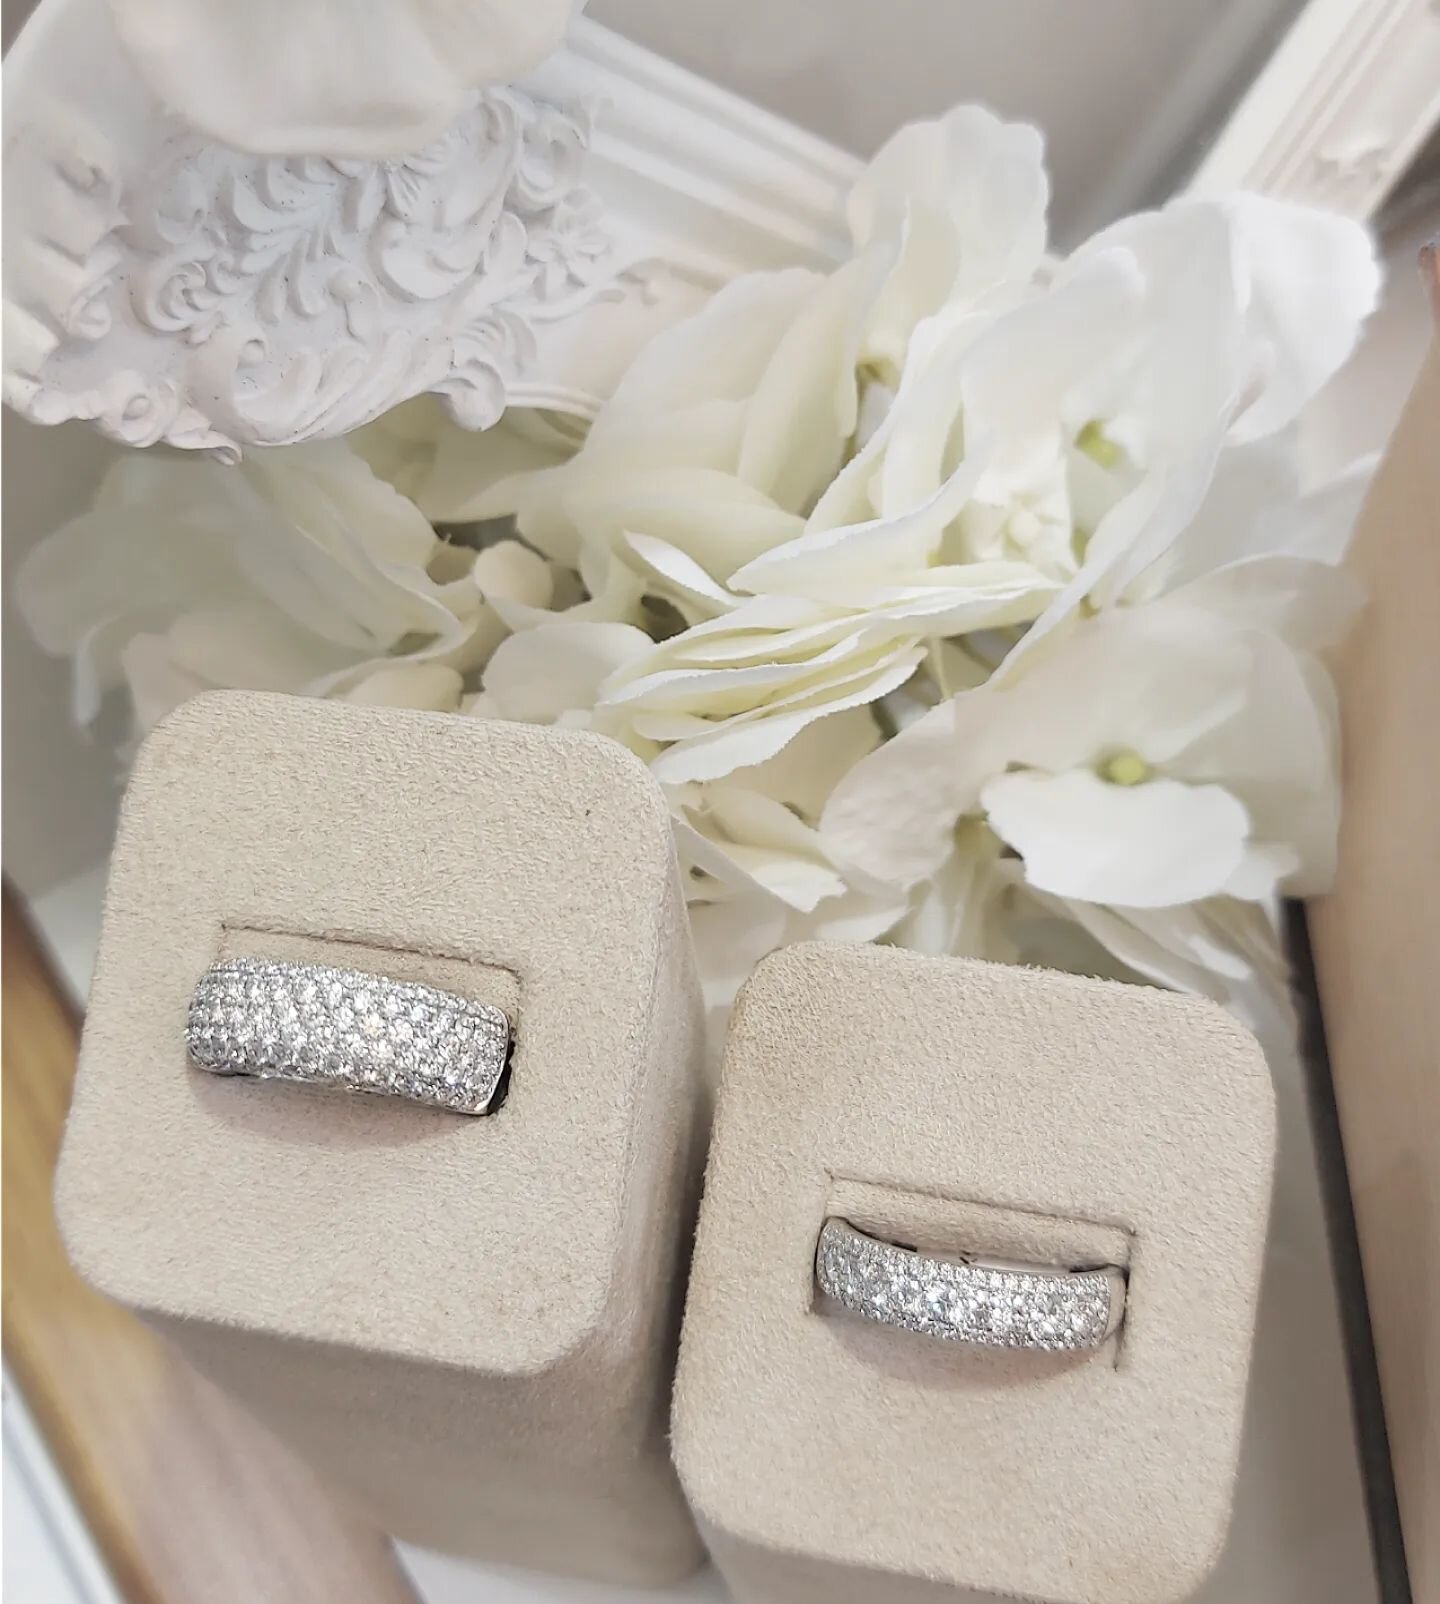 If you love sparkle... these are definitley for you!
.
 How amazing are these 18ct white gold pave set diamond bands 💎 
.
.
.
.
#cartersjewellers #lovediamonds #lovejewellery #paveset #wedding bands #weddingjewellery #eternityrings #jewellersofbolto